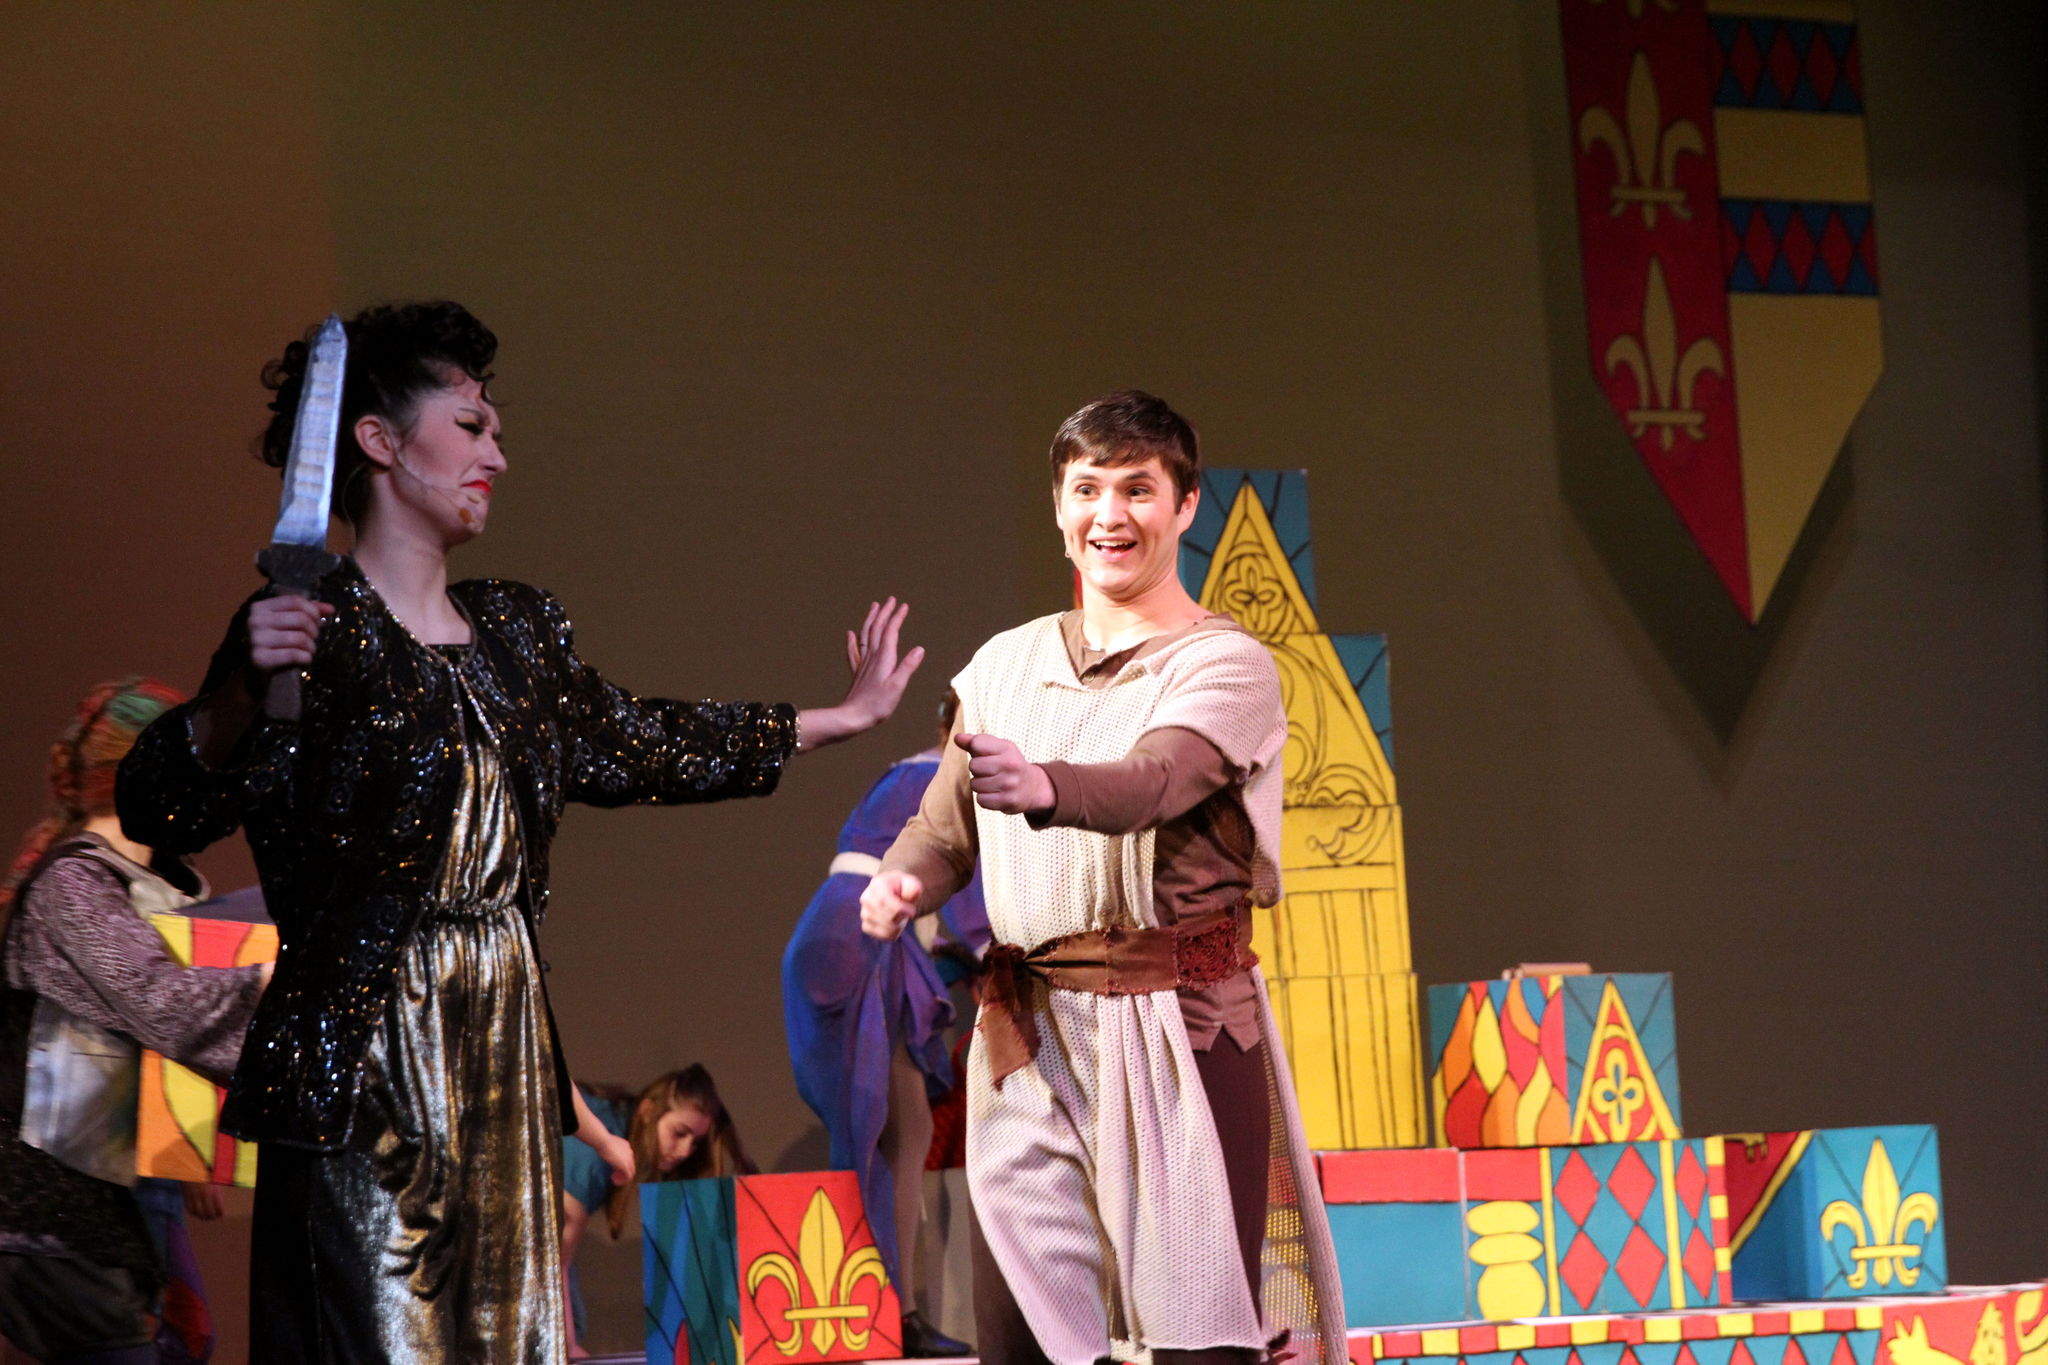 Andrea Ramirez and Josh Basher perform in the musical “Pippin” at Arlington High School.